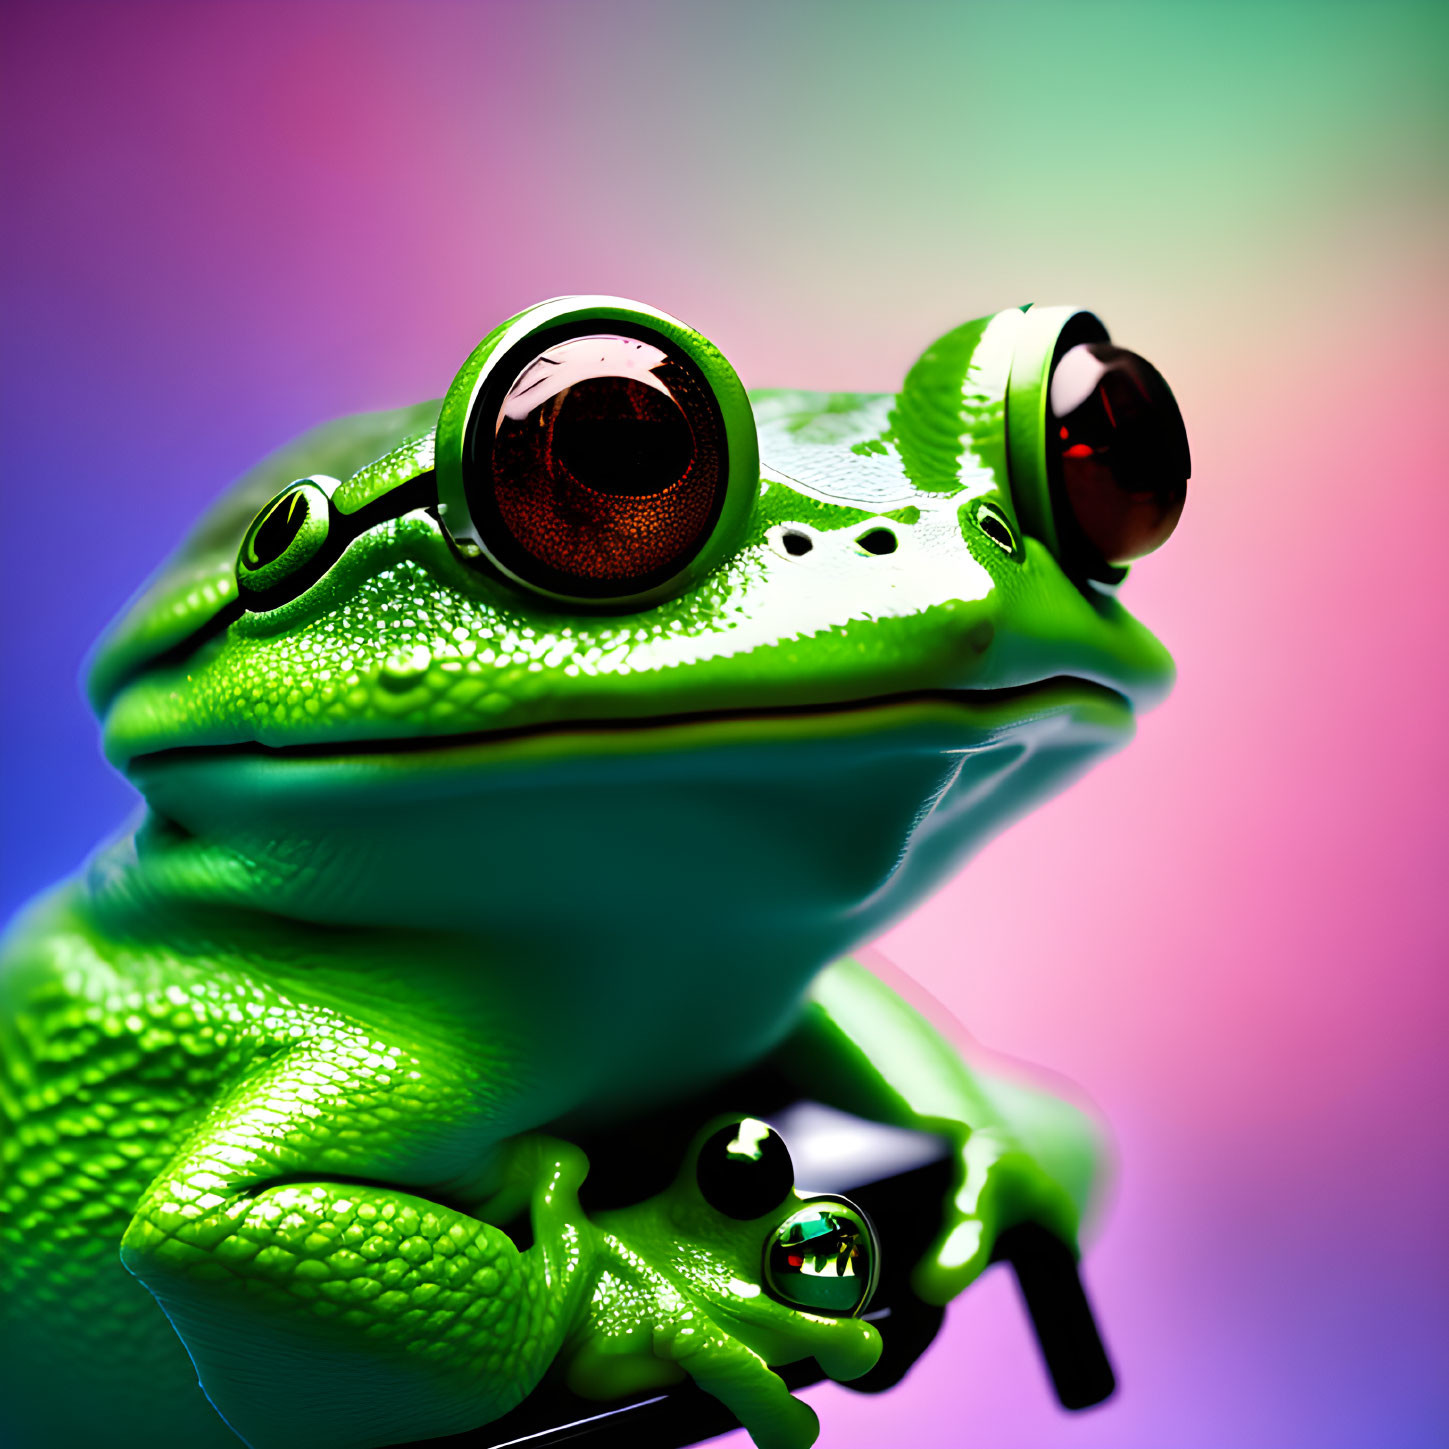 Green frog with bulbous eyes on vibrant multicolored backdrop